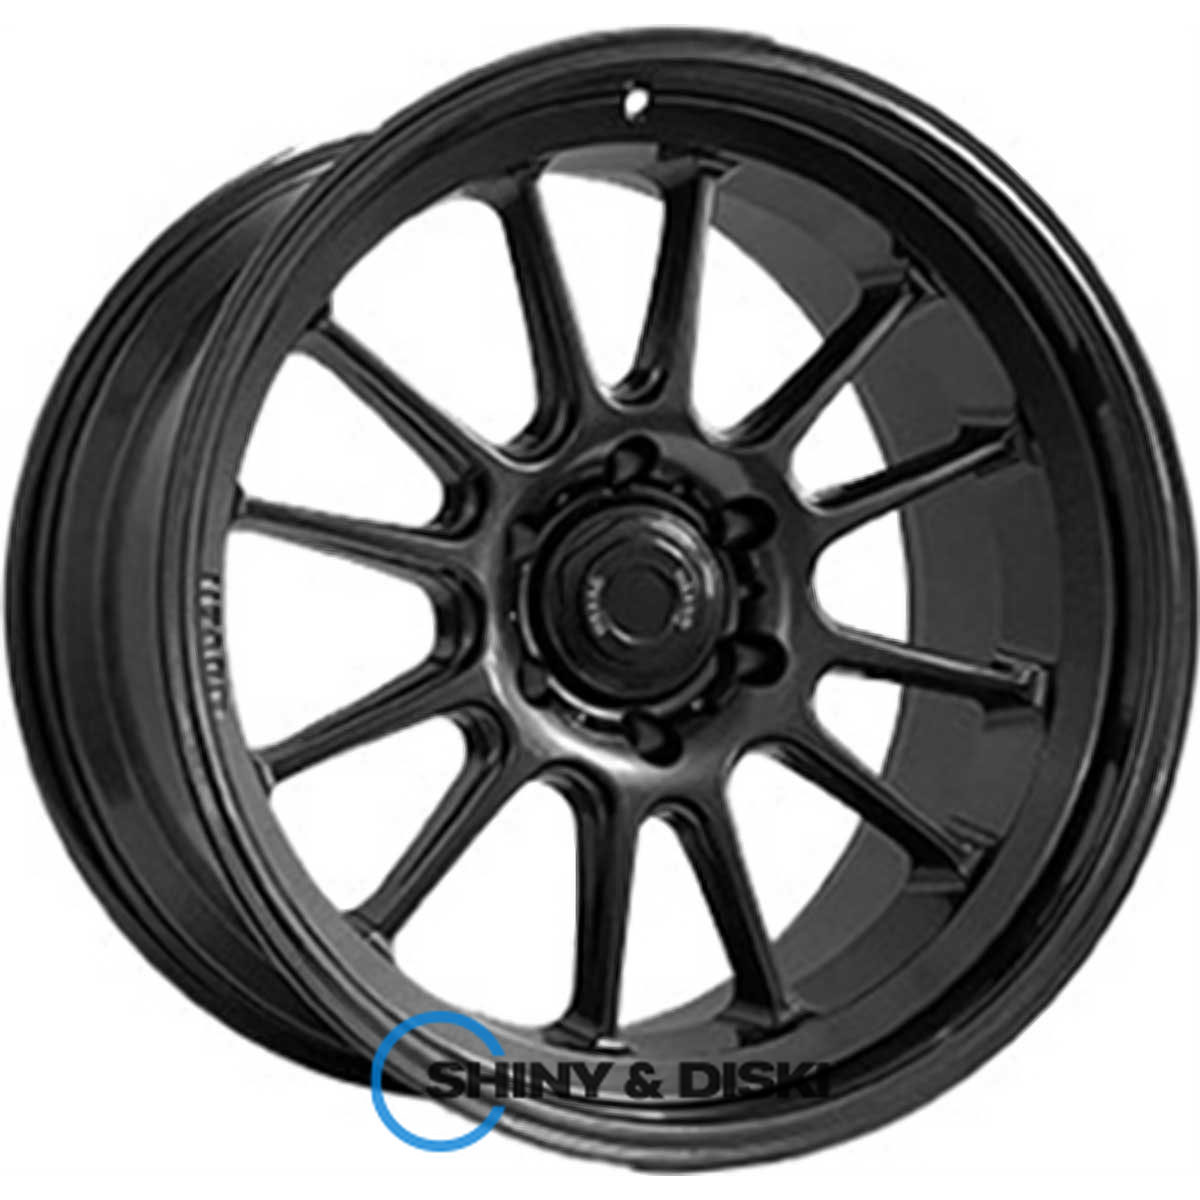 off road wheels ow1017 hb